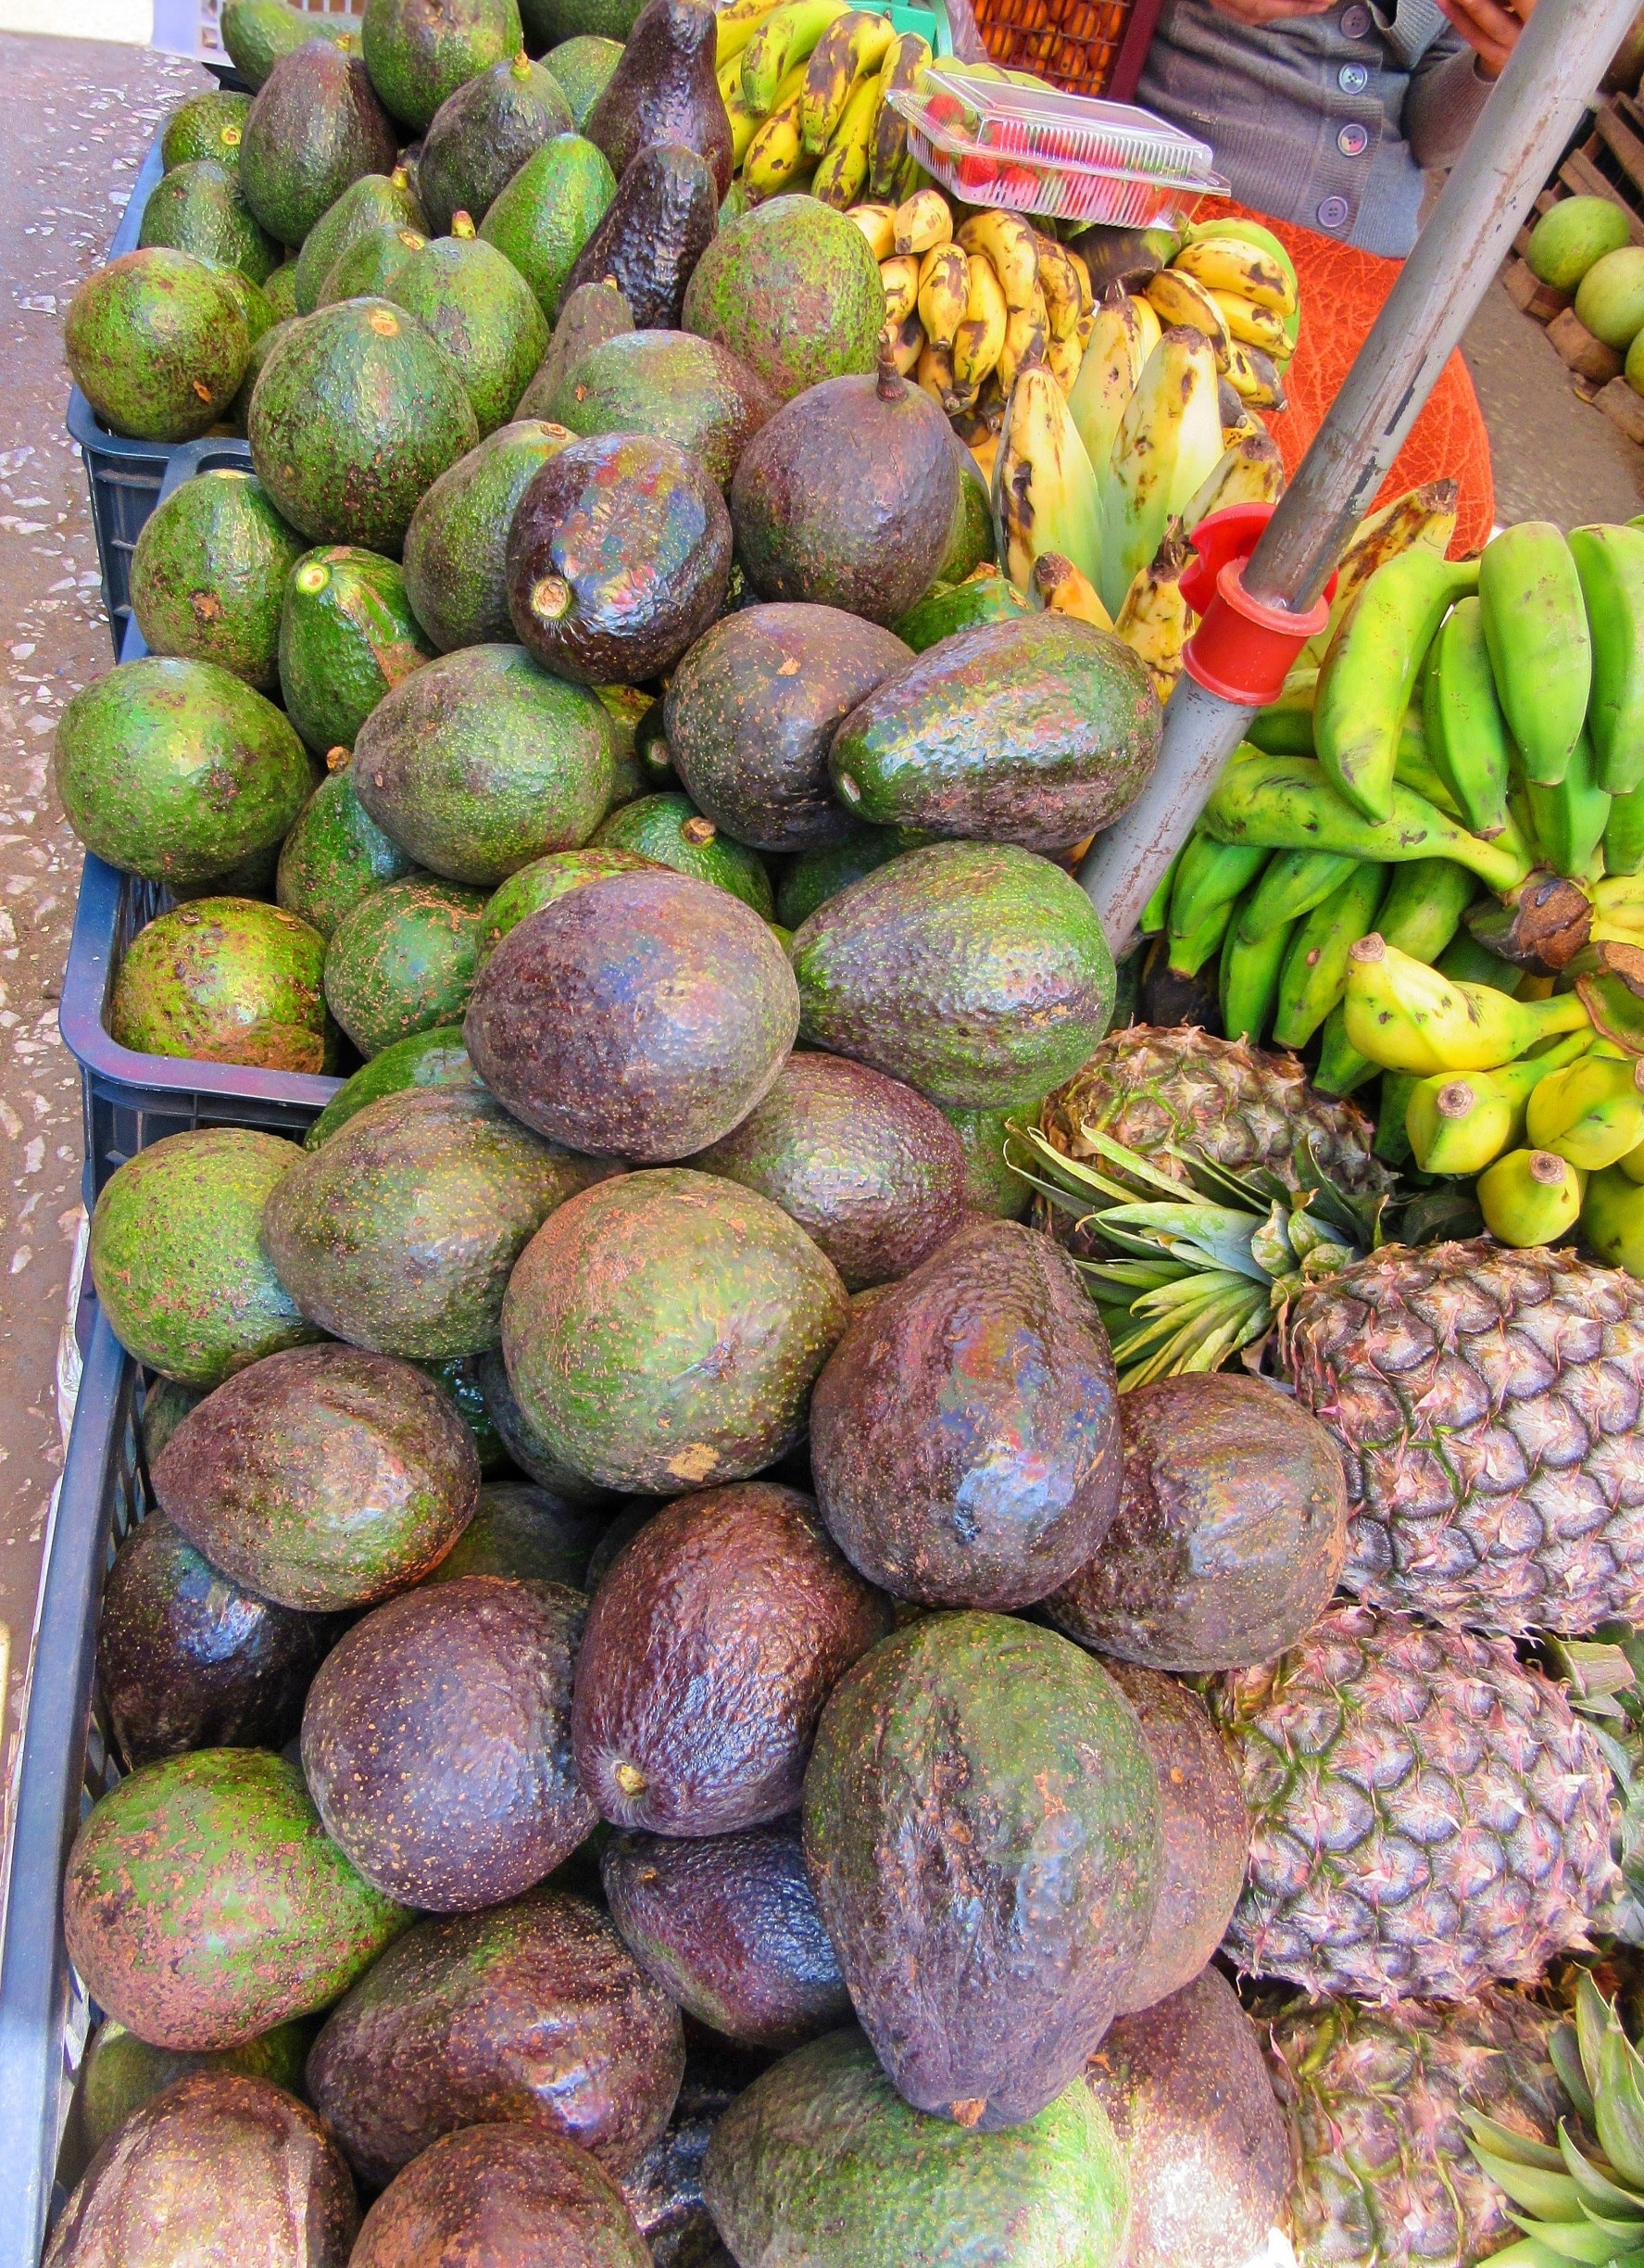 One of my favourite street markets in Asia was the small, one-street market in Kalaw, Myanmar. It might have had something to do with the fact that, yes, those are normal pineapple-sized pineapples, but no, those are not normal sized avocados. #guacamole4lyfe
#market